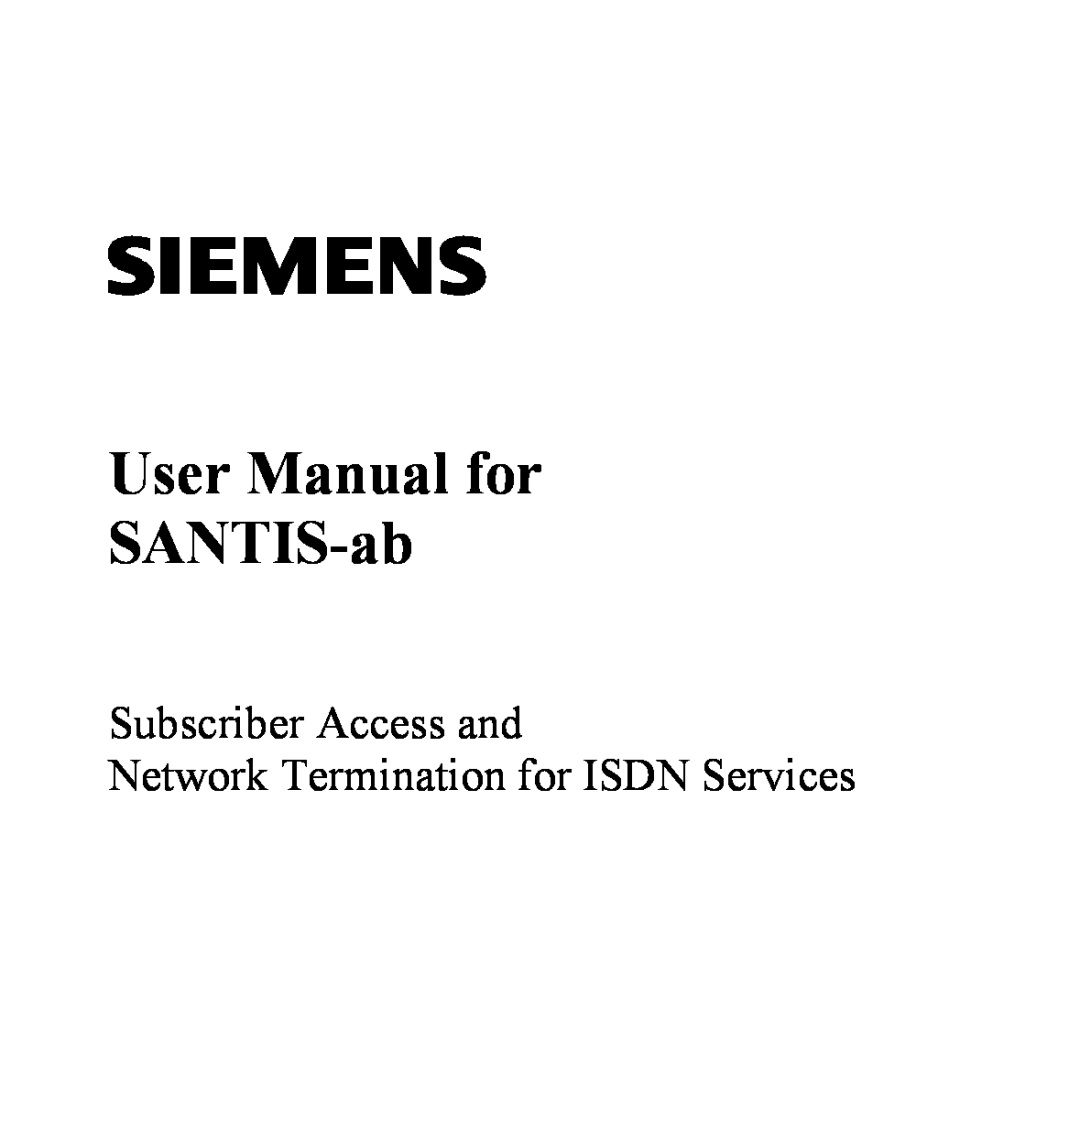 Siemens user manual Subscriber Access and Network Termination for ISDN Services, User Manual for SANTIS-ab 